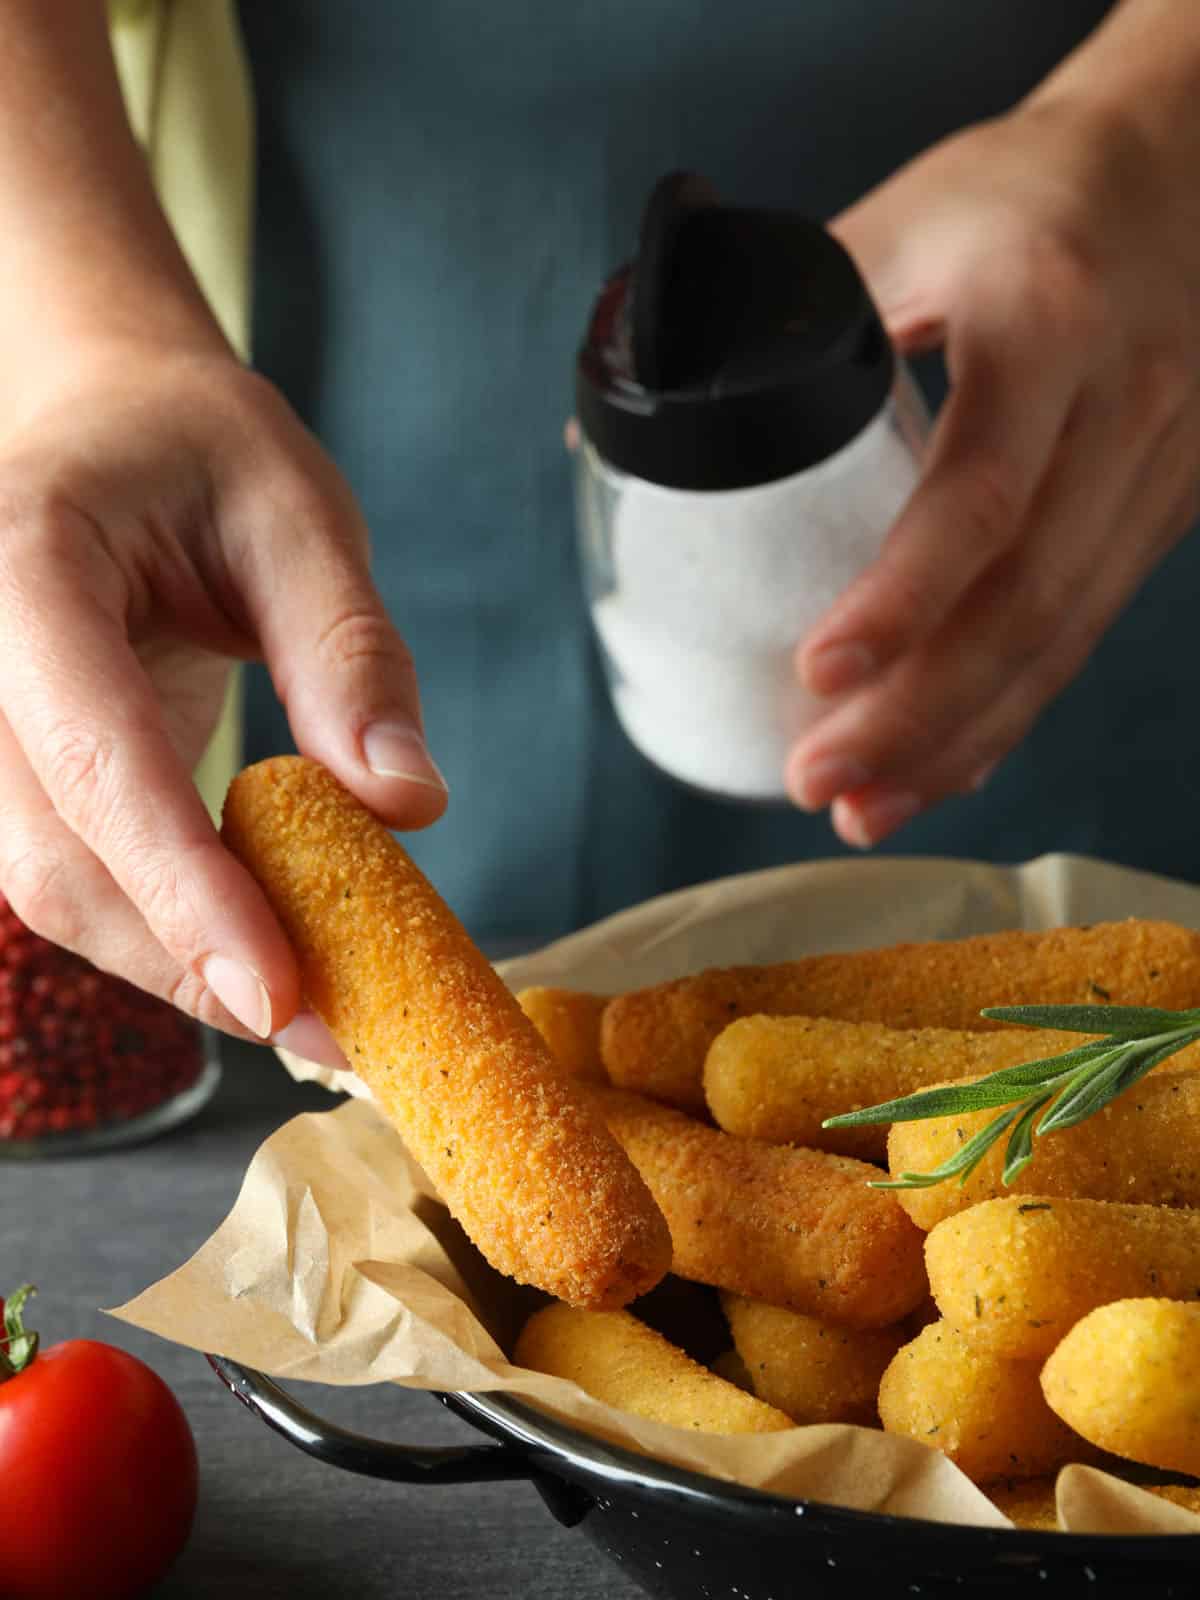 Mozzarella sticks are a classic snack that you can enjoy in various ways. While some prefer to bake mozzarella sticks, others prefer the traditional frying method. But what about microwaving mozzarella sticks?